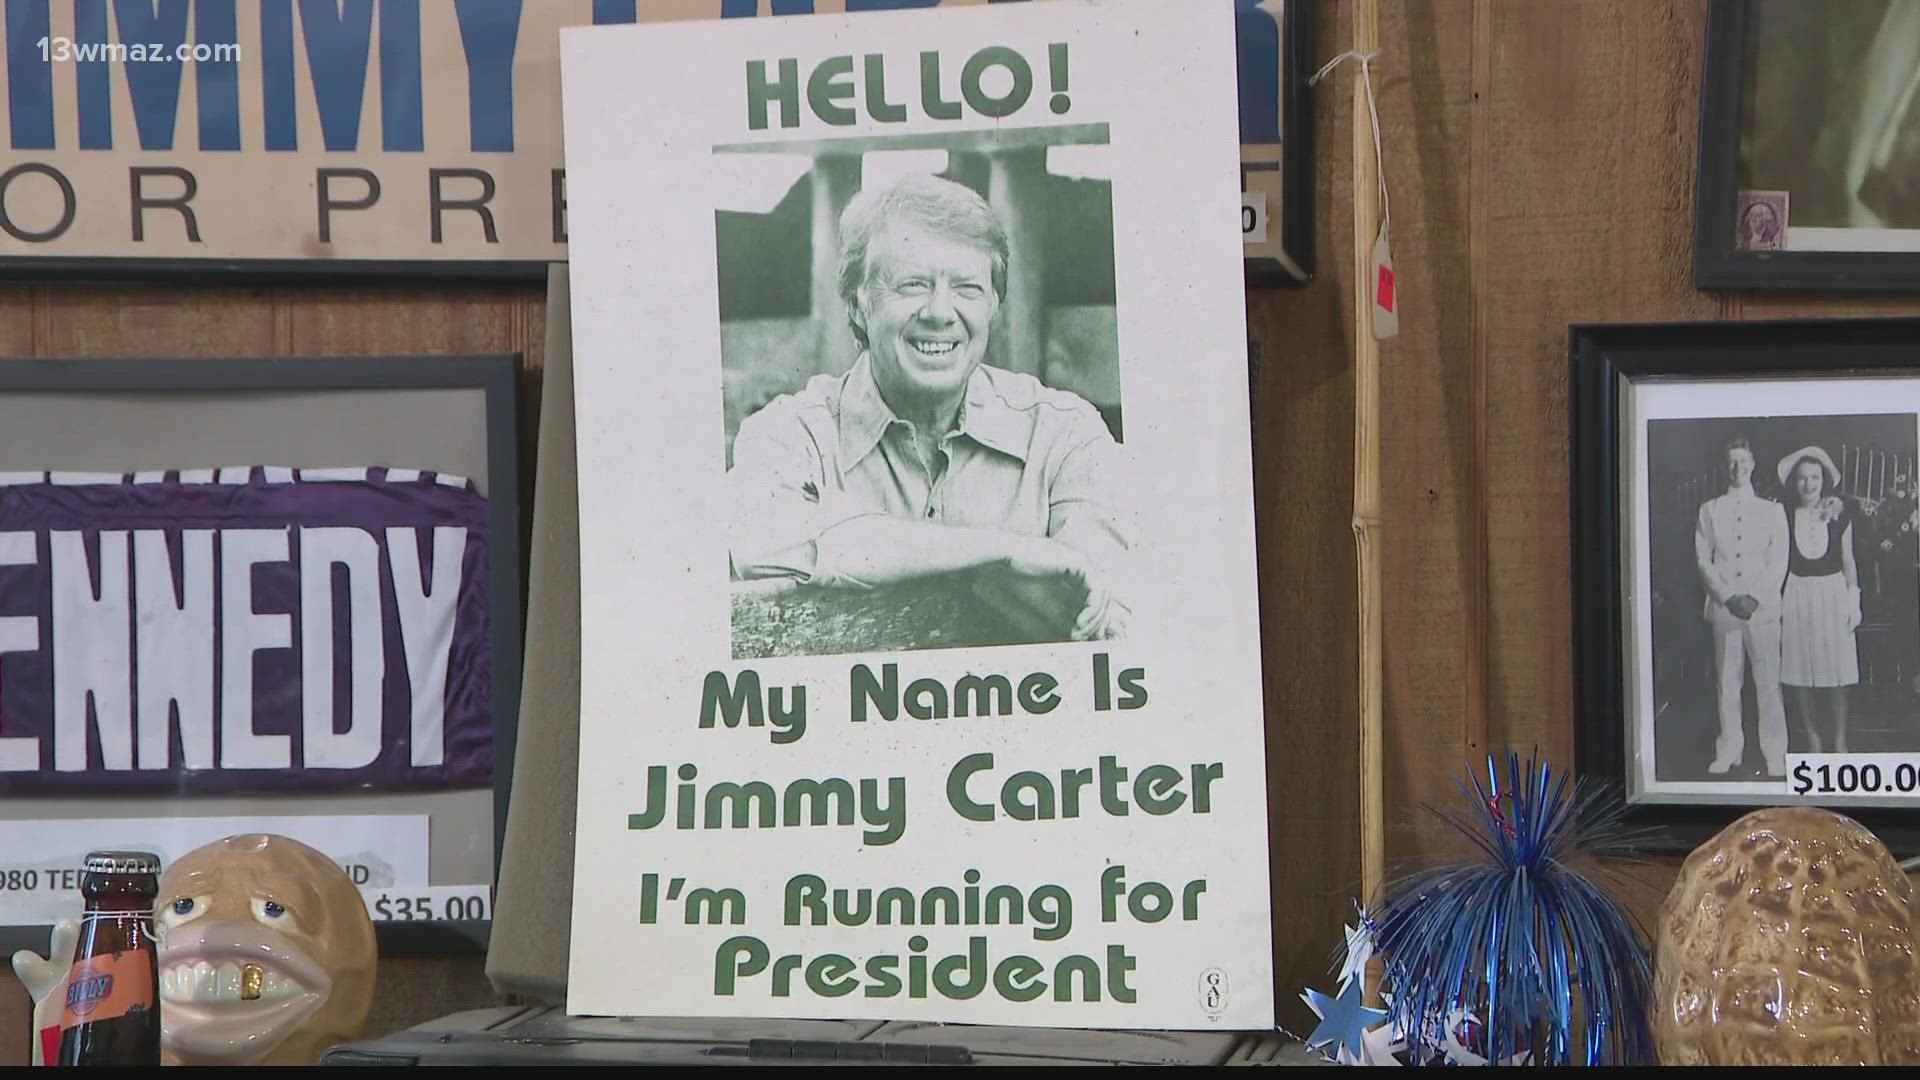 The Carter name is all over downtown Plains, but plenty of people across the state have Jimmy Carter stories of their own.